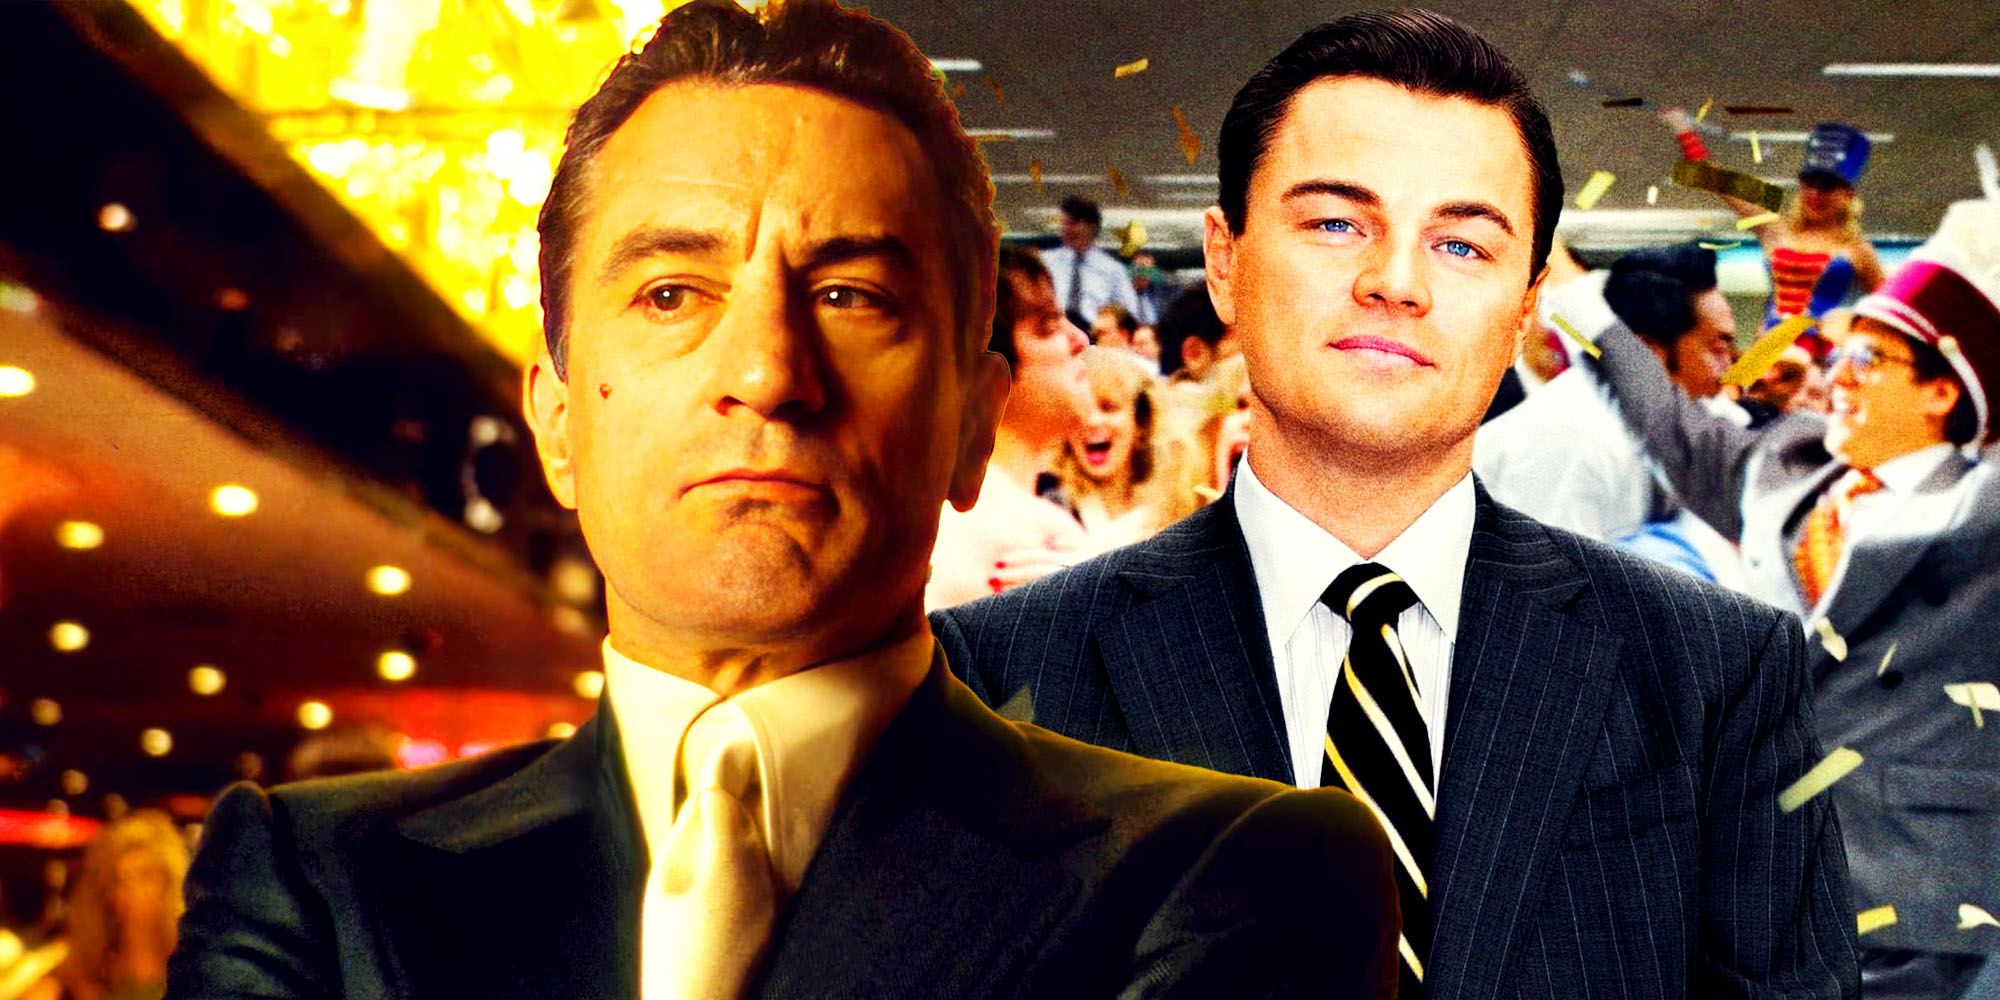 Collage of Robert De Niro in Casino and Leonardo DiCaprio in The Wolf of Wall Street